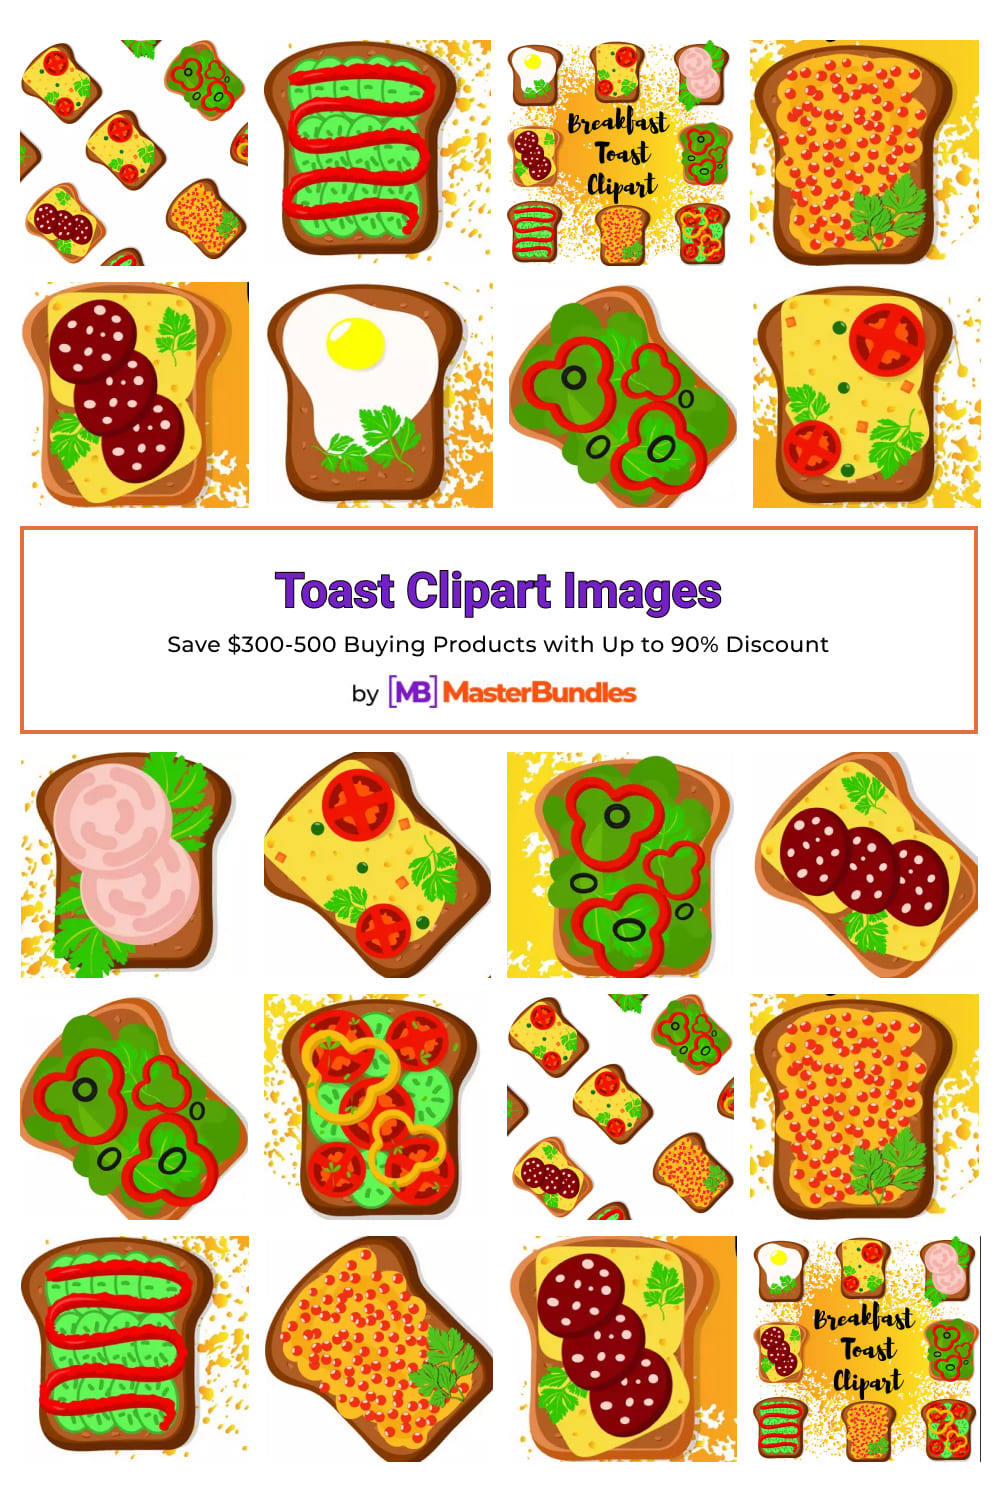 Toast Clipart Images Pinterest image.